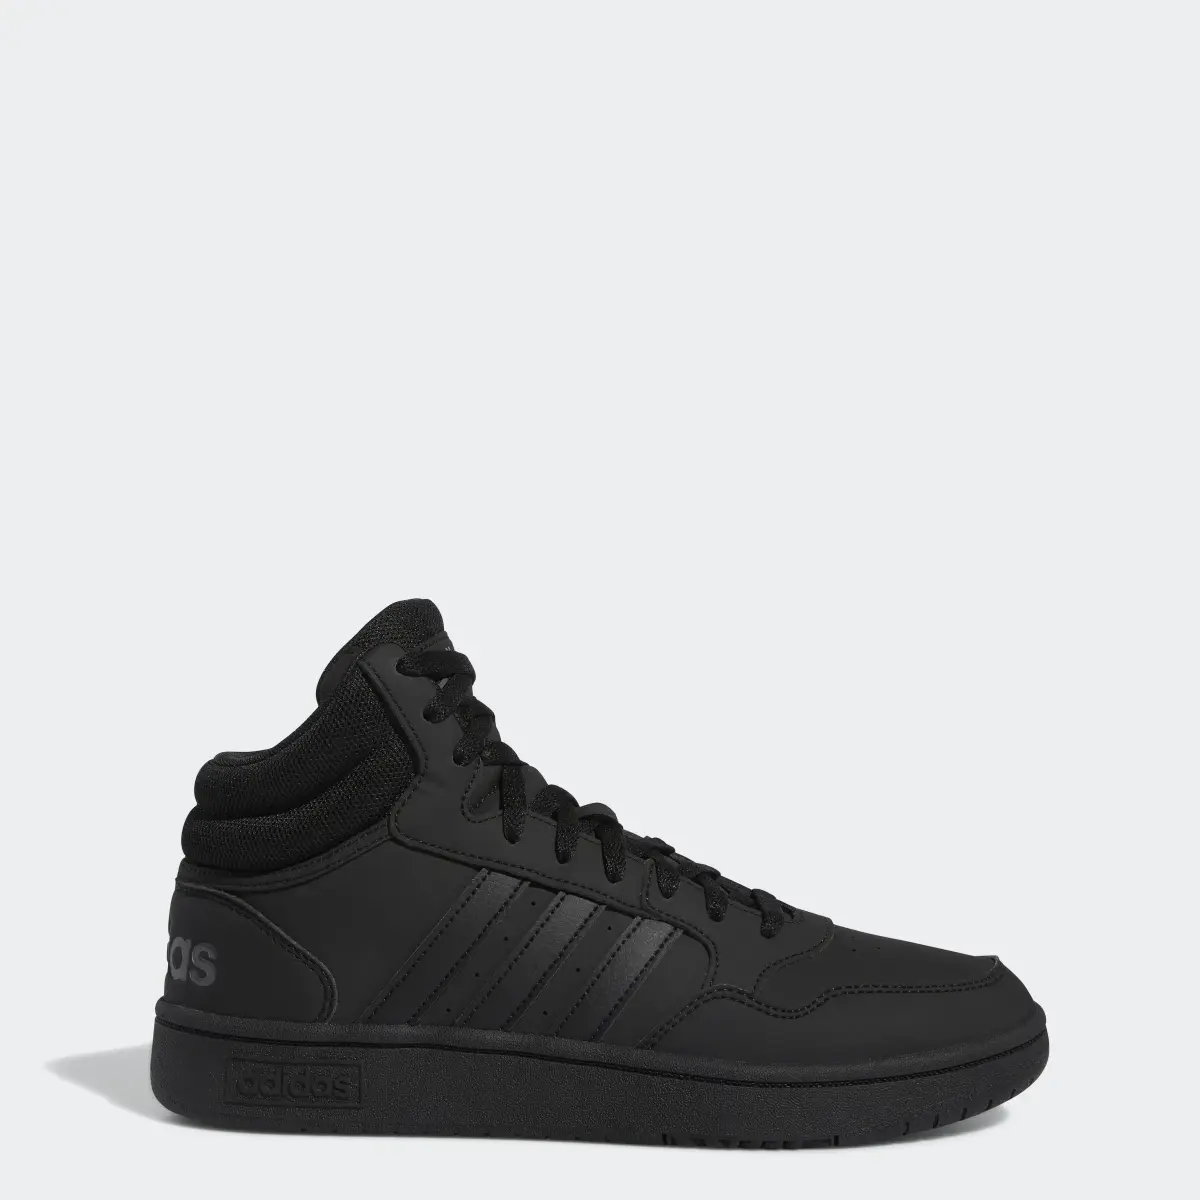 Adidas Chaussure Hoops 3 Mid Lifestyle Basketball Mid Classic. 1